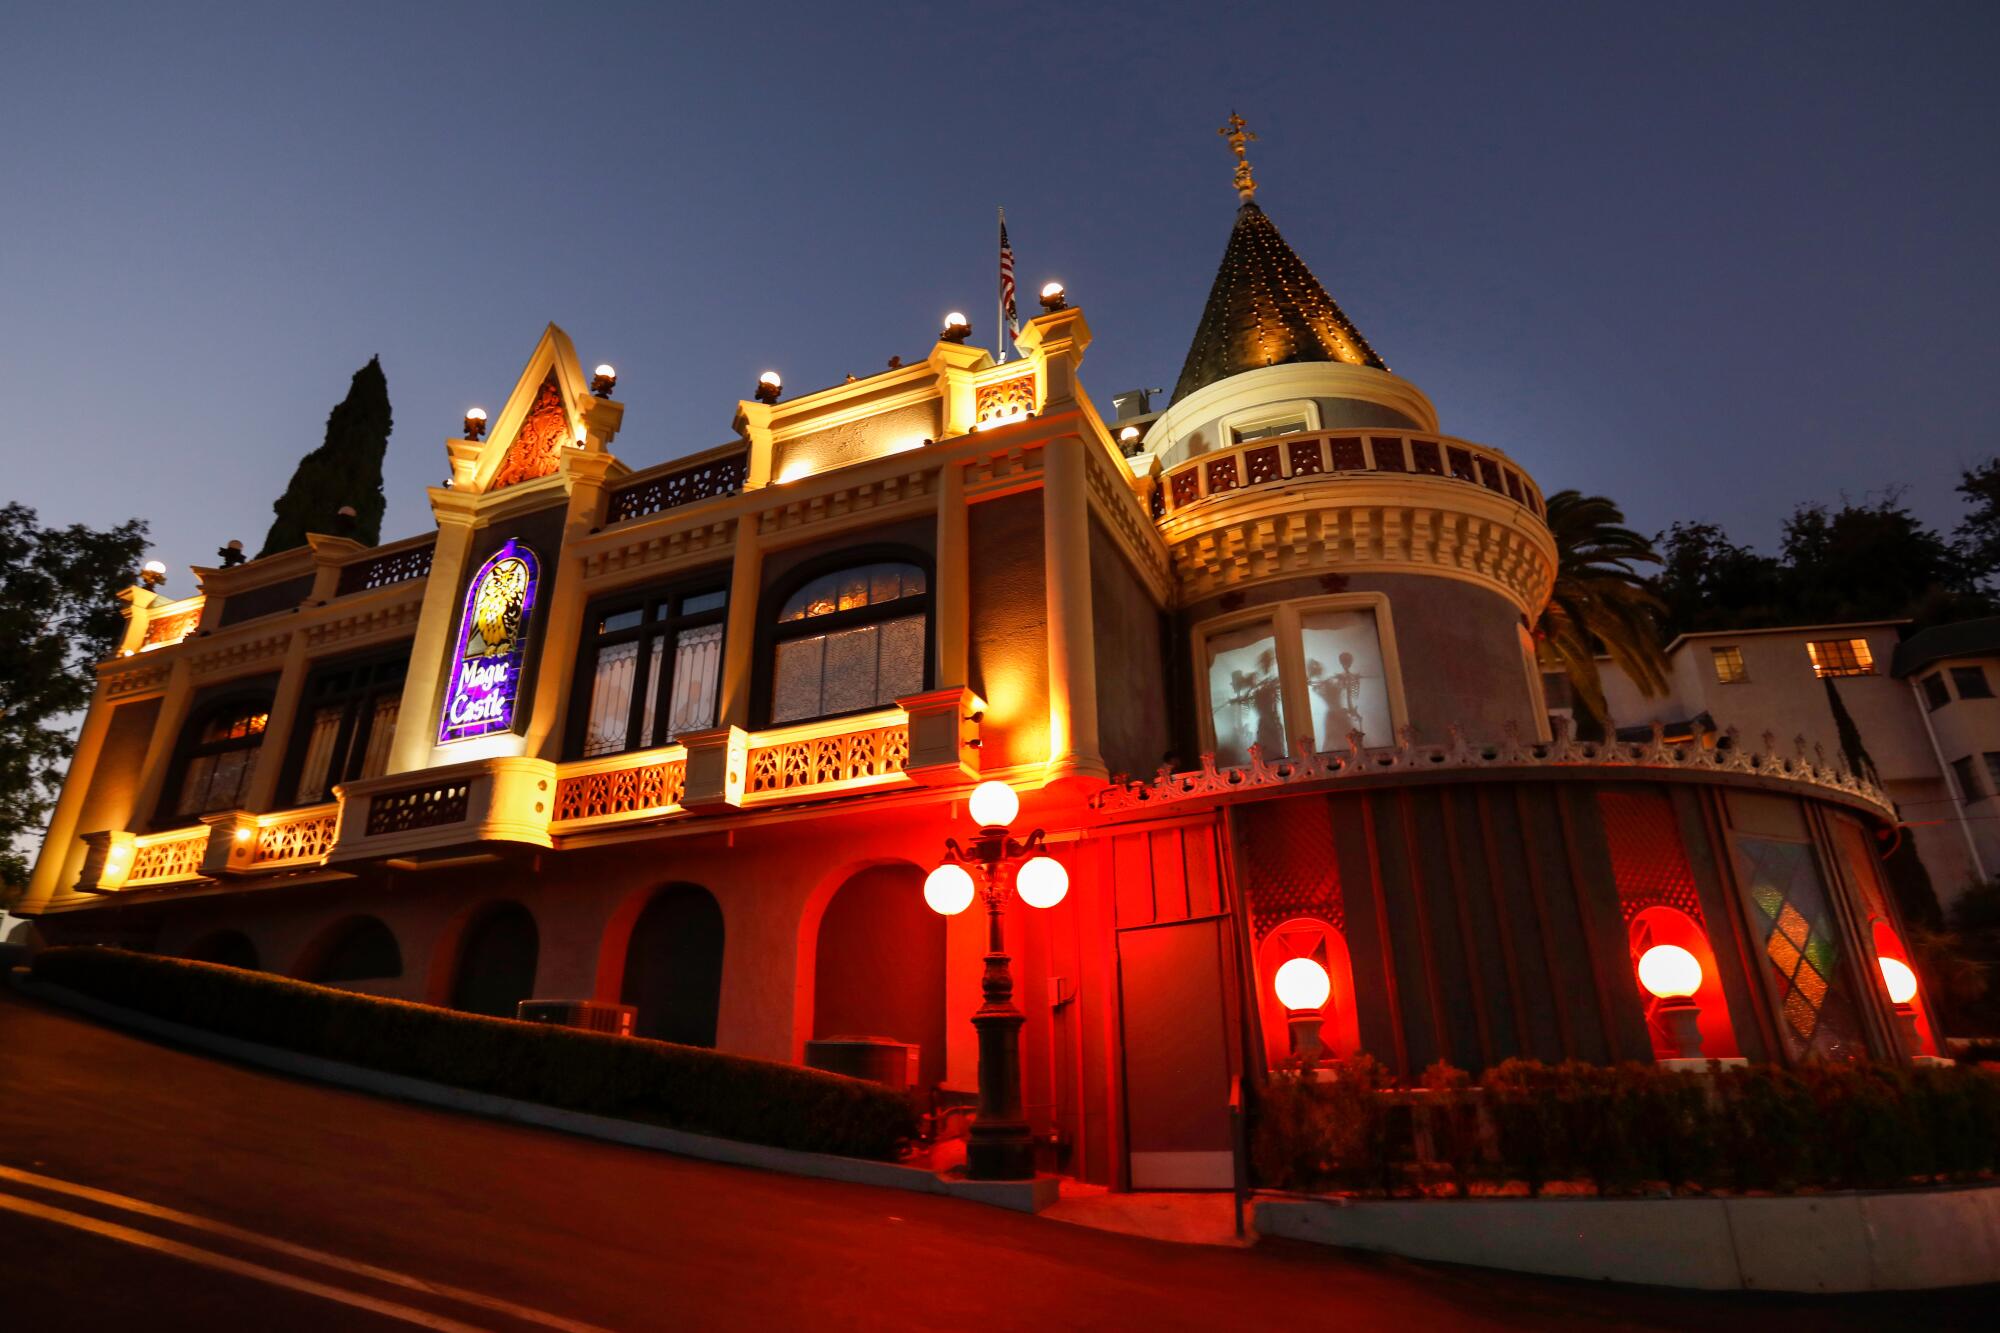 The Magic Castle, a private club that has magic shows and other entertainment, is located at 7001 Franklin Ave. in Hollywood.